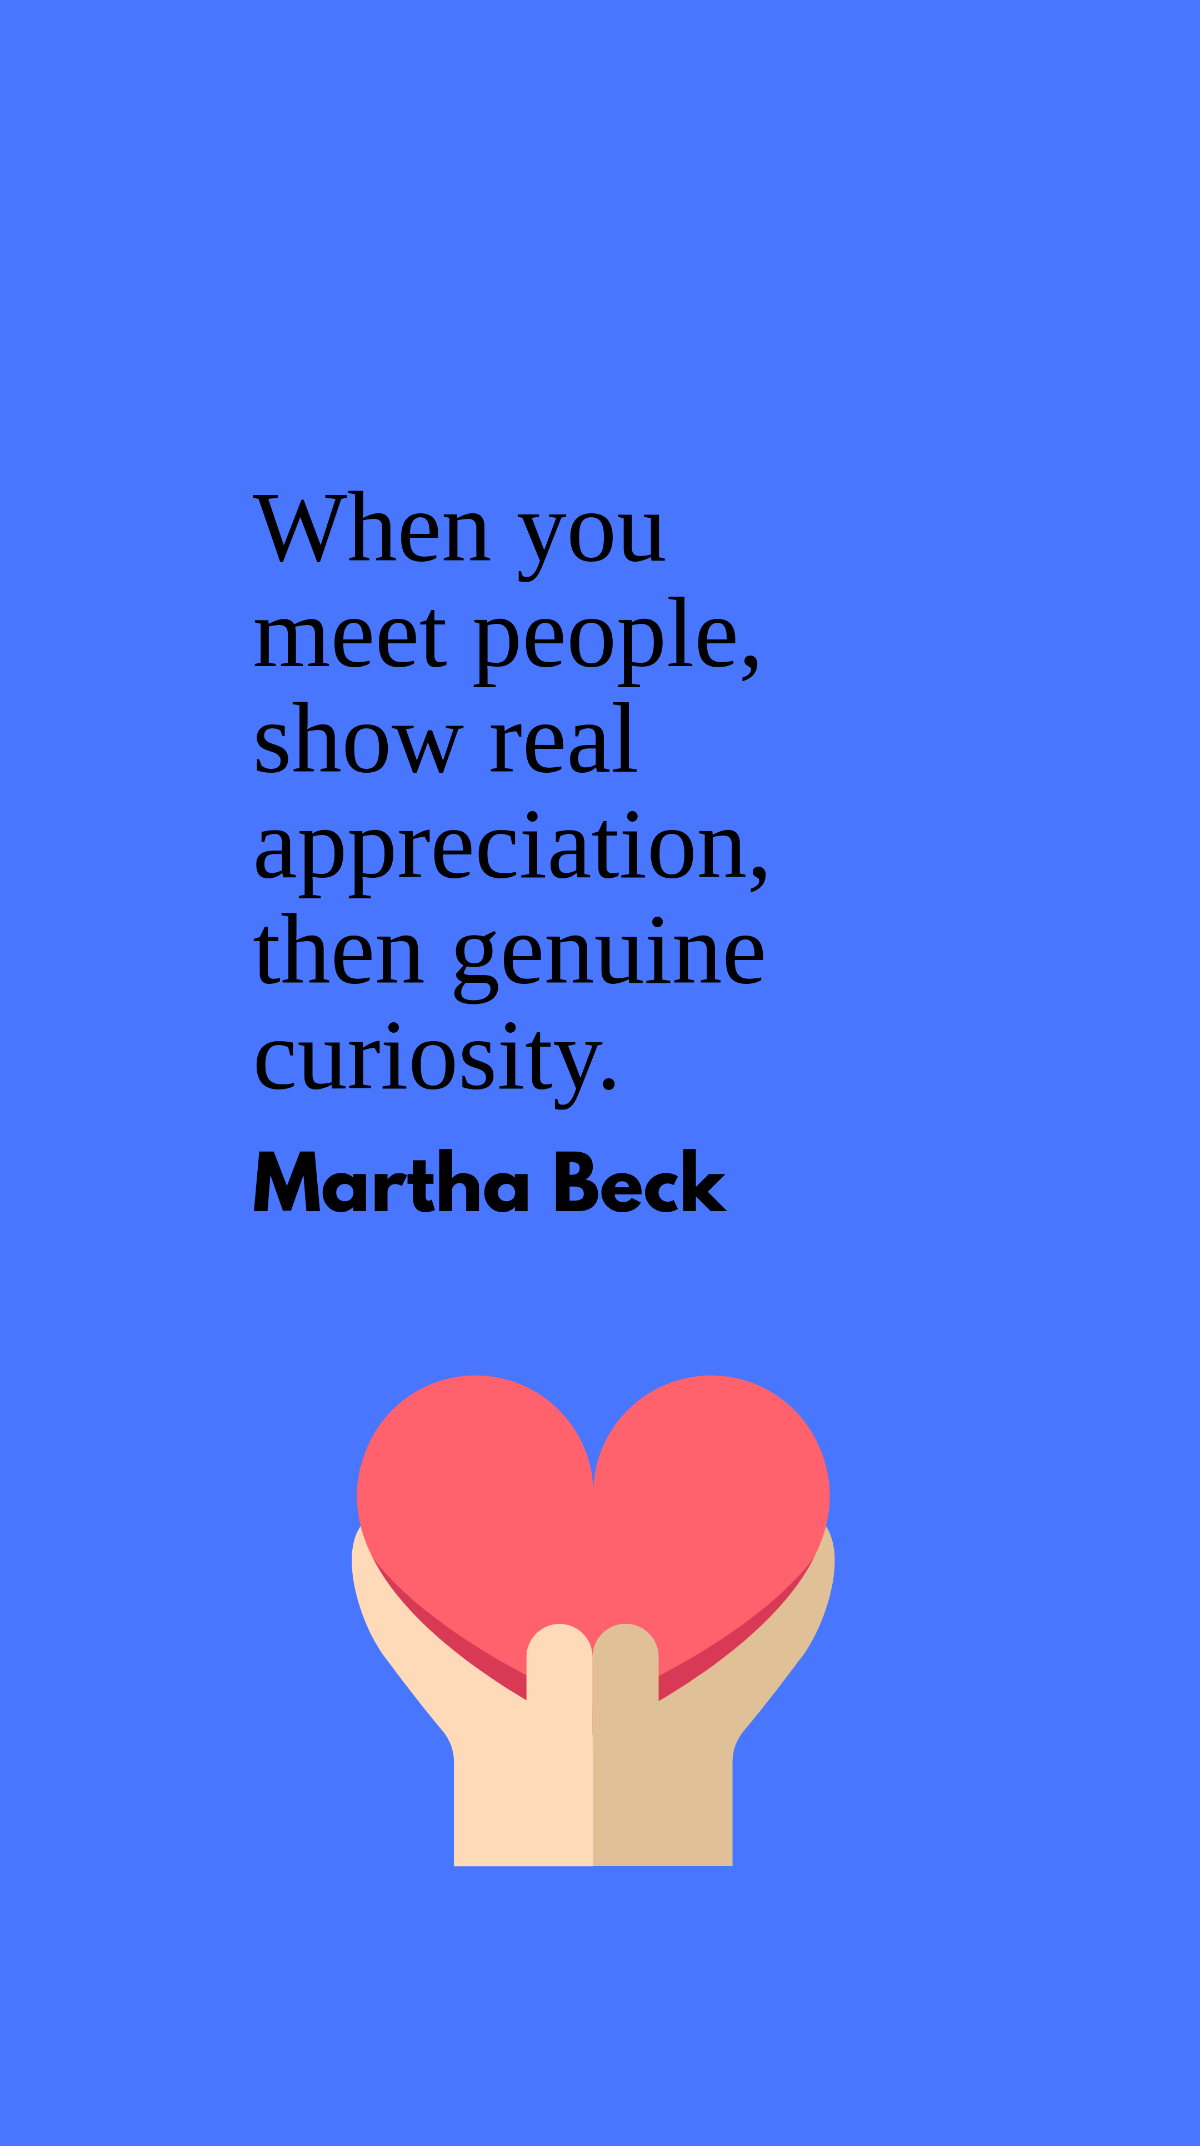 Free Martha Beck - When you meet people, show real appreciation, then genuine curiosity. Template